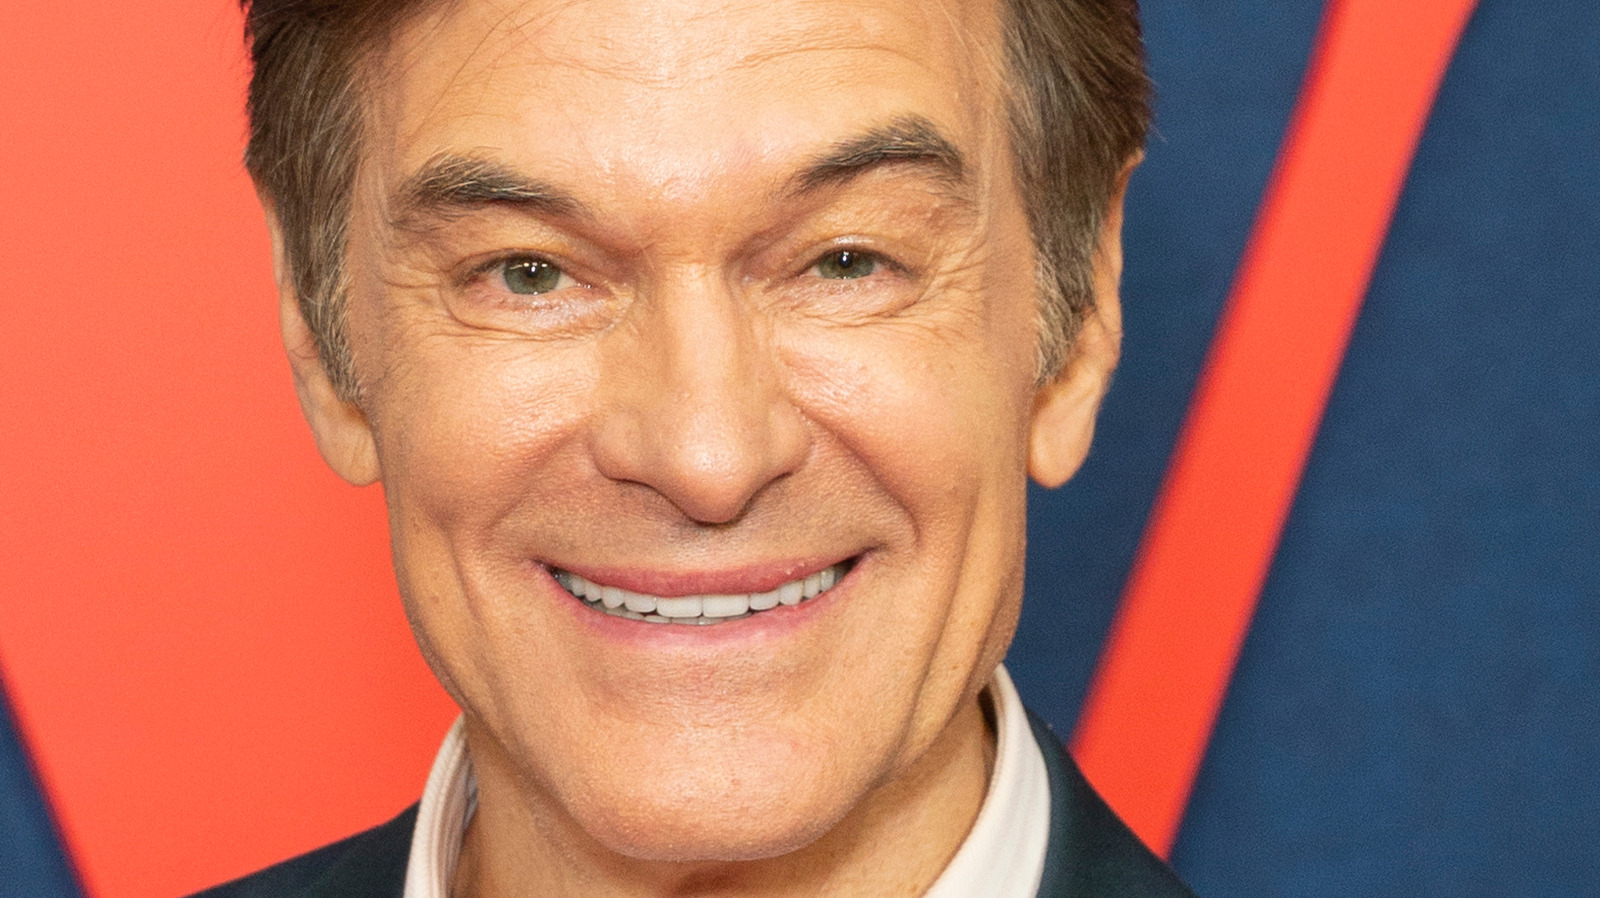 Dr. Oz's Blue Hair: What Does It Mean for His Brand? - wide 8